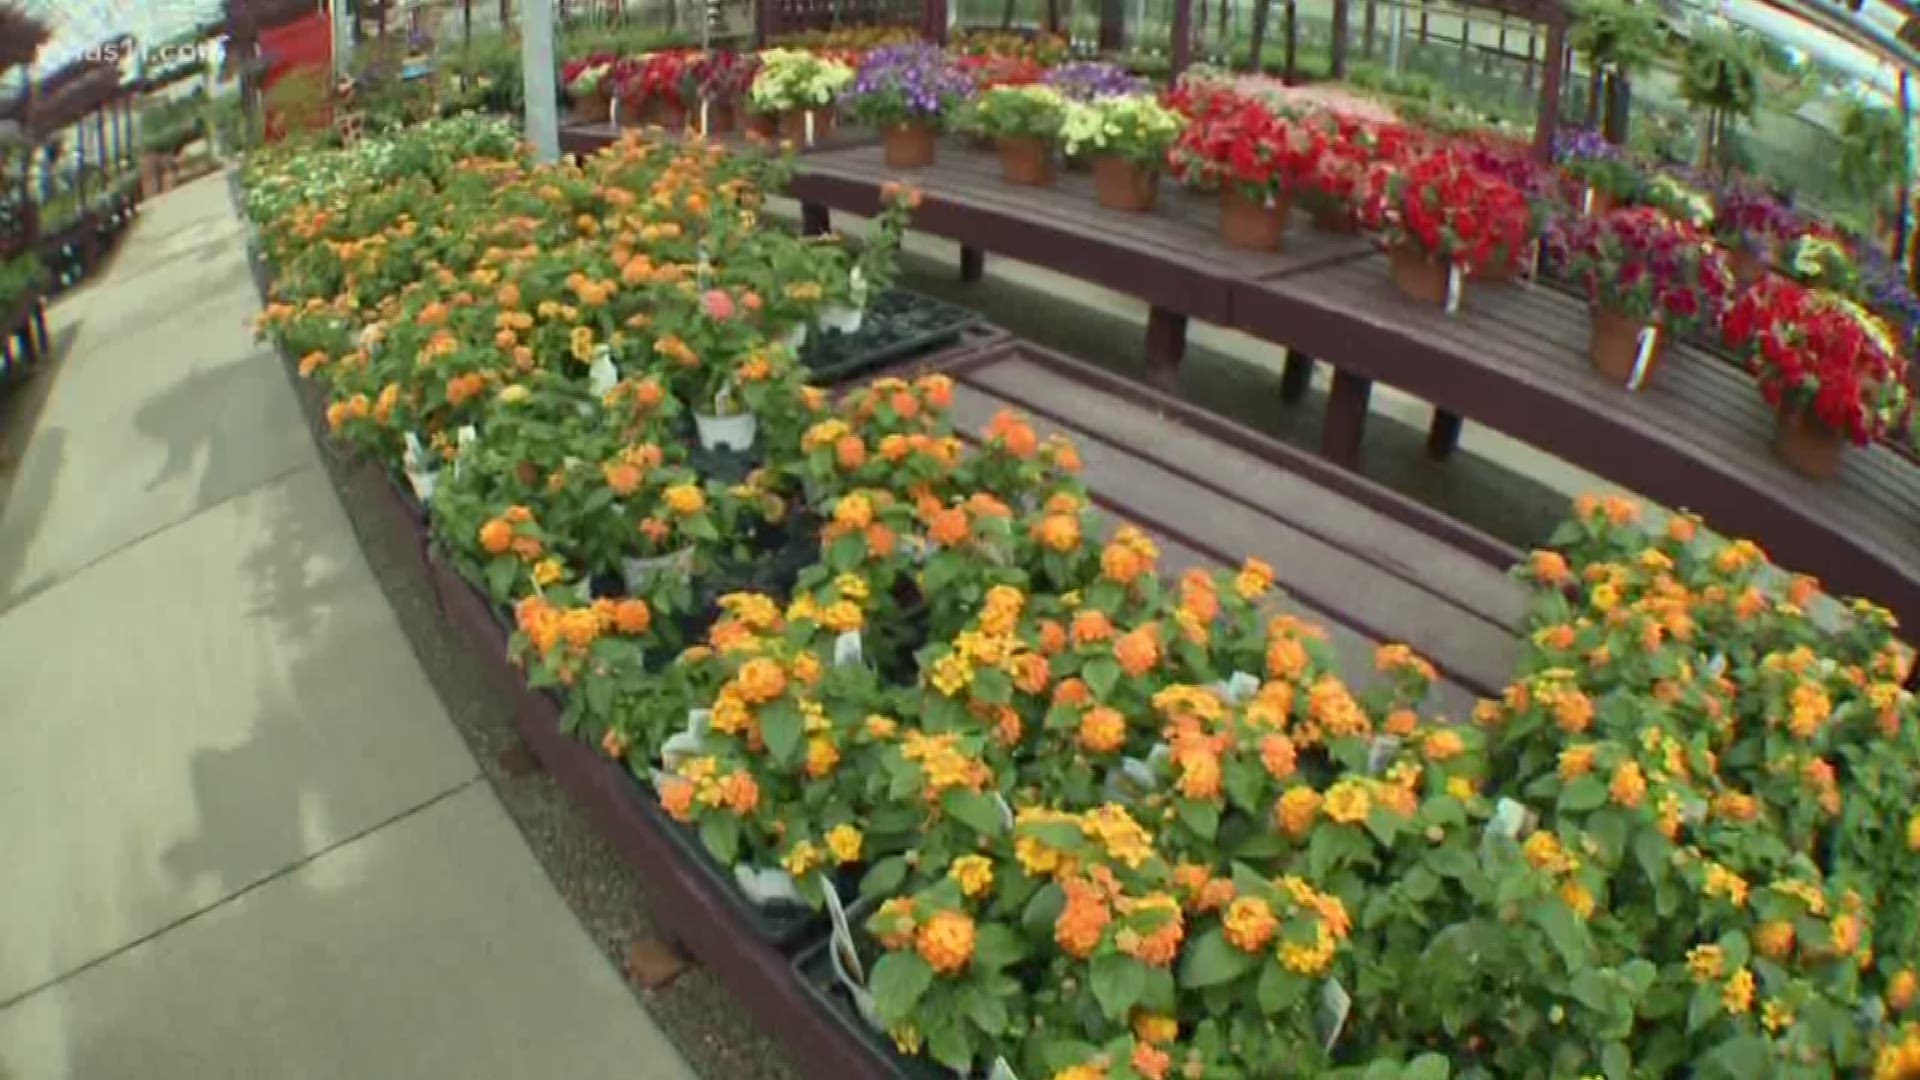 Ben Pine learns which plants are ideal for planting in the summer months with Jeff Wallitsch